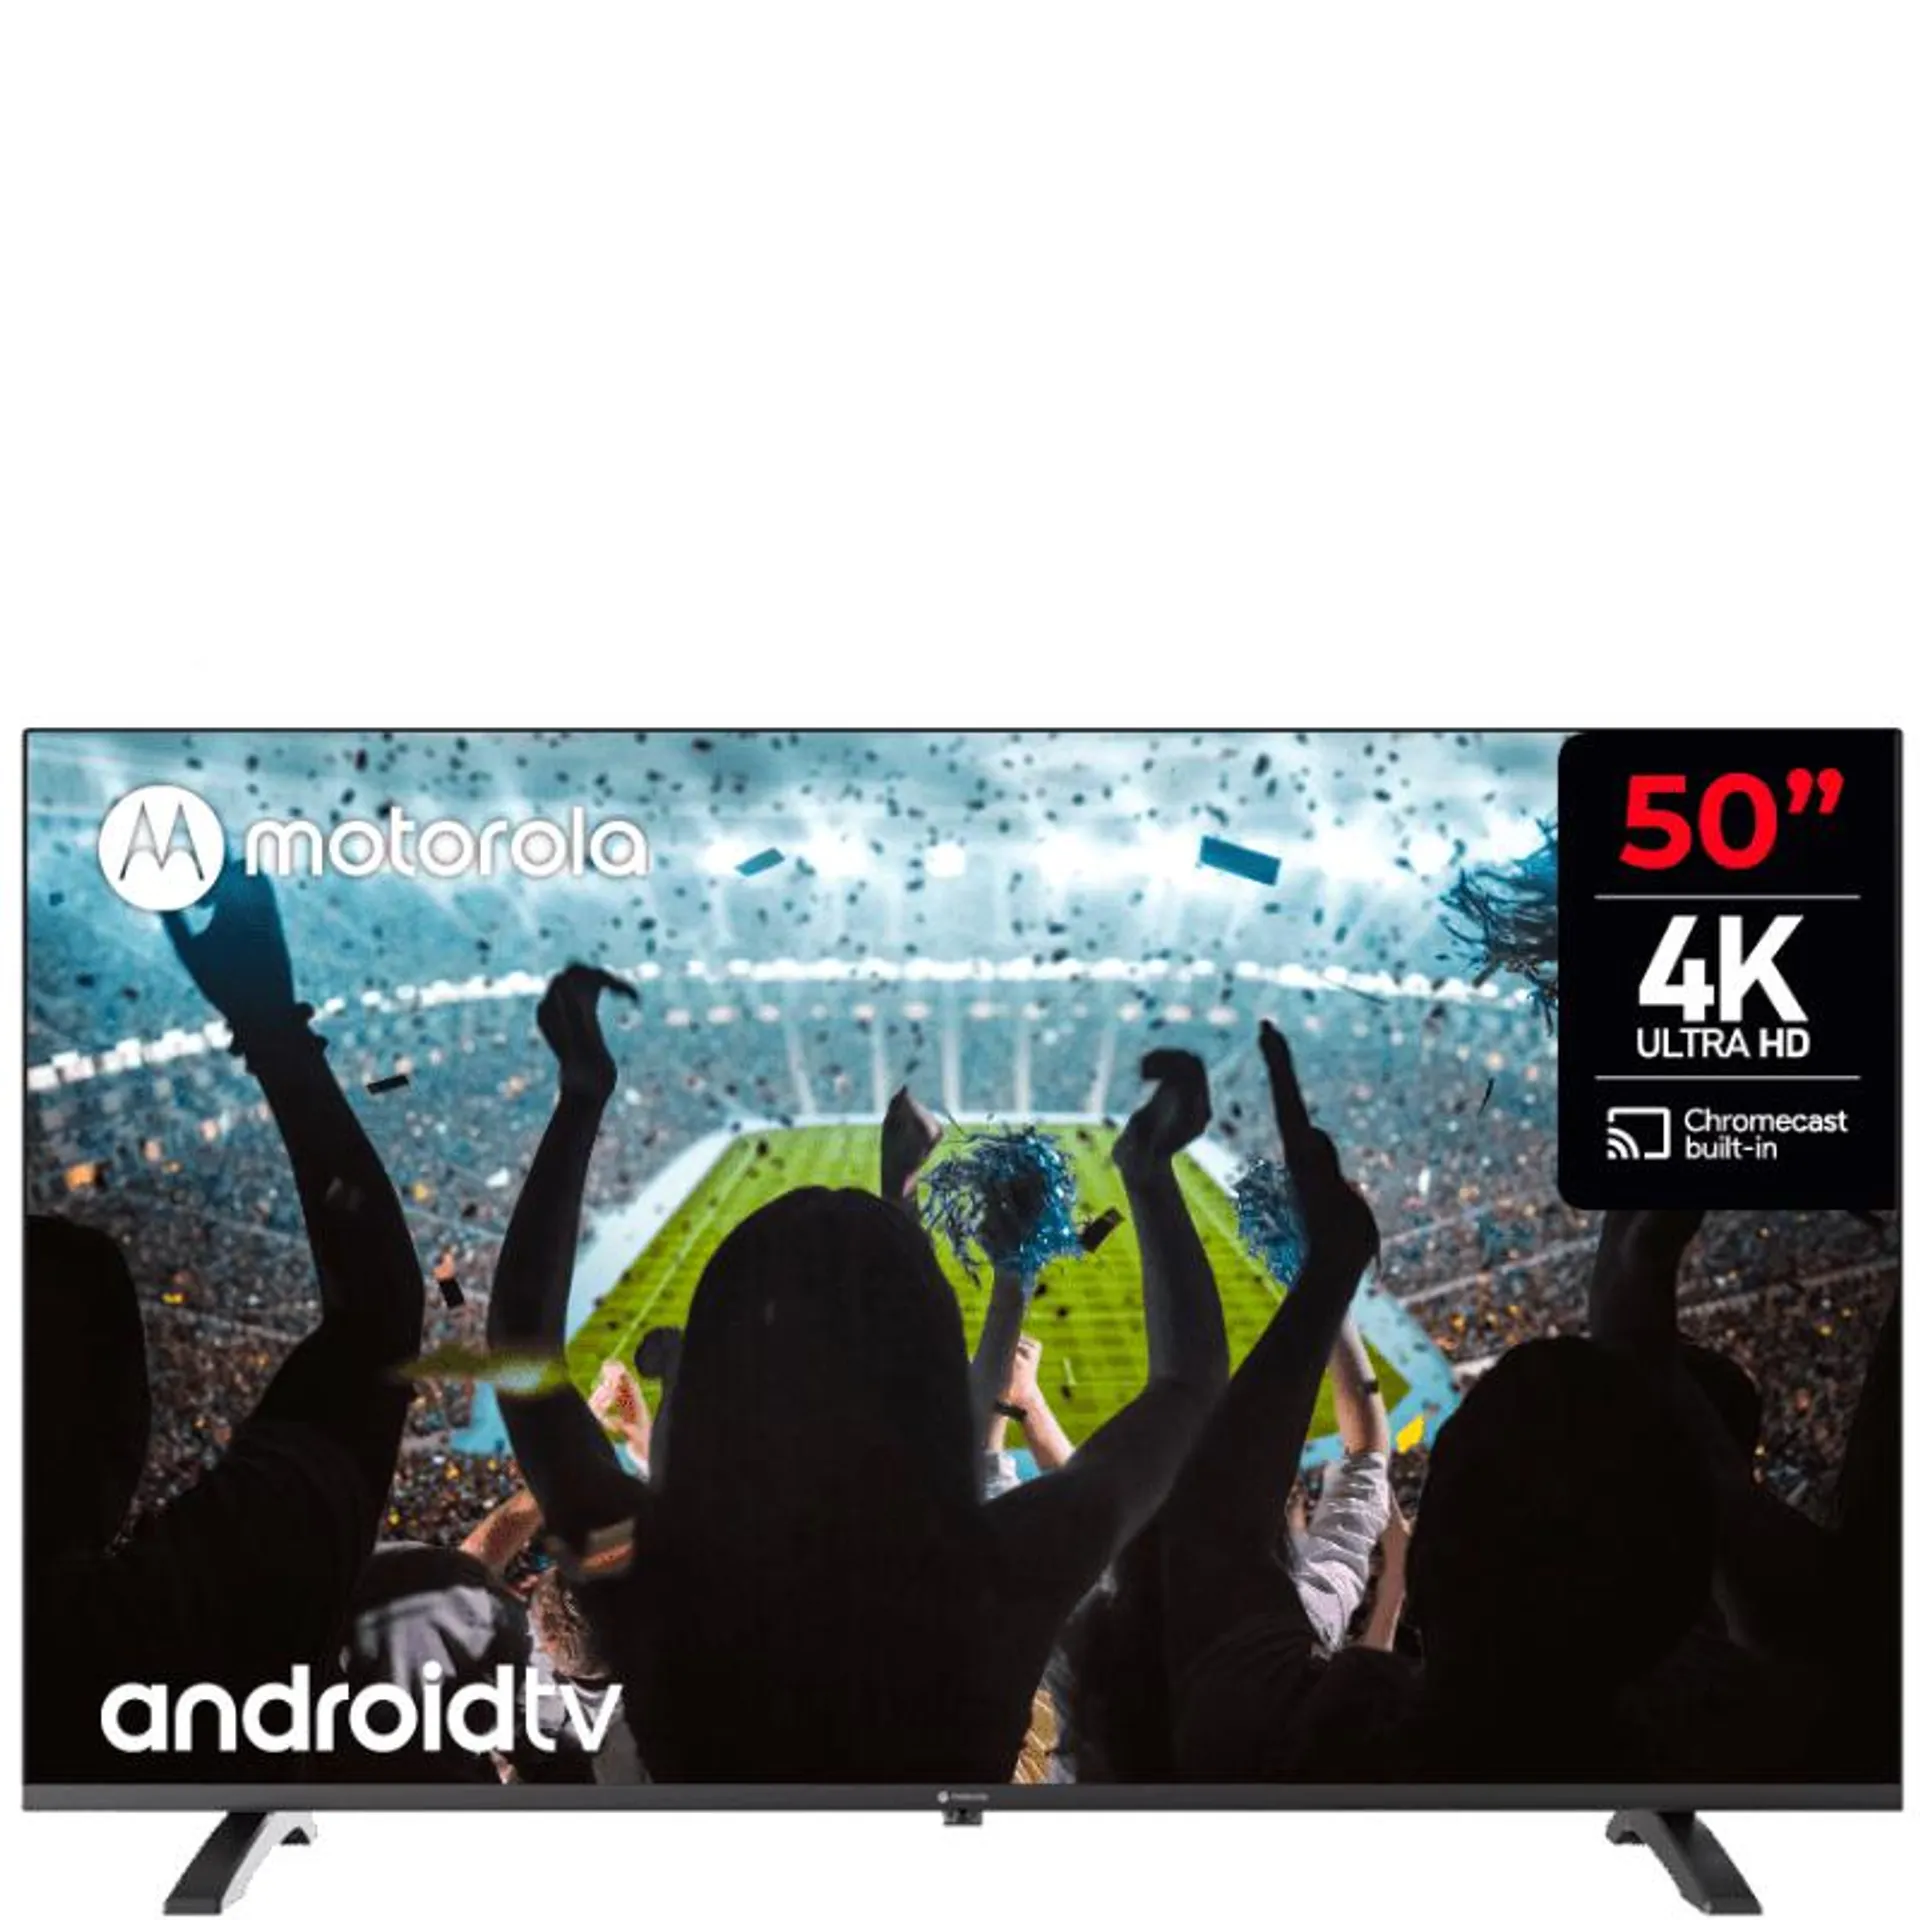 ANDROID TV 50" 4K ULTRA HD 91MT50